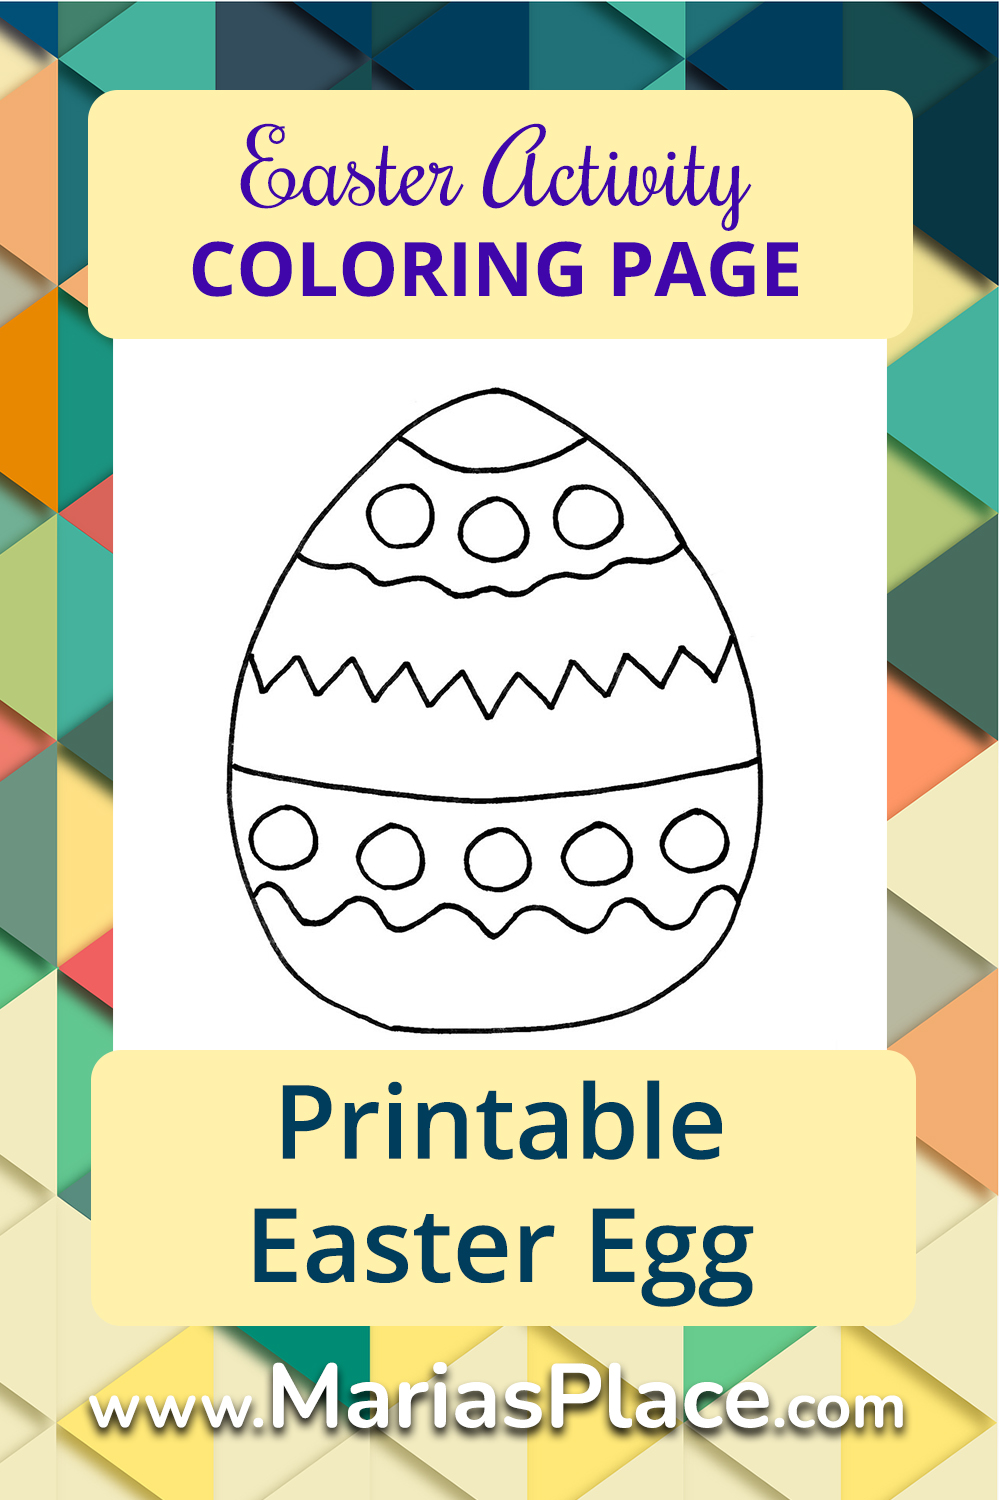 Coloring – Large Easter Egg